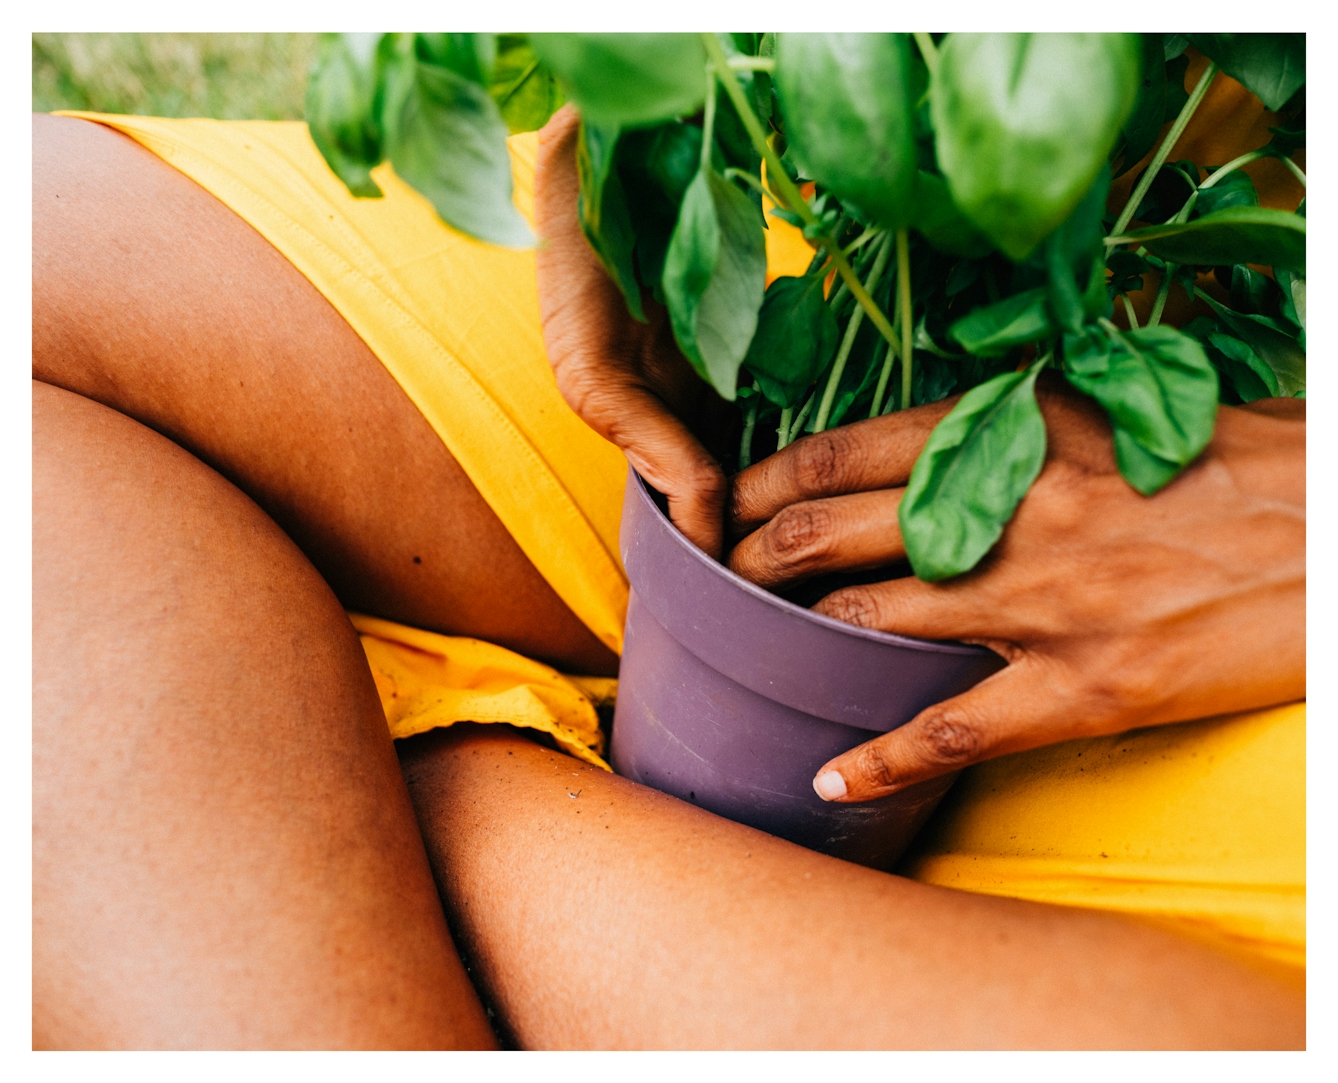 Colour close-up photoigraph of a woman sat cross-legged on grass and holding a purple plant pot with basil growing in it. Her two hands are inside the pot. She is wearing a yellow skirt. 